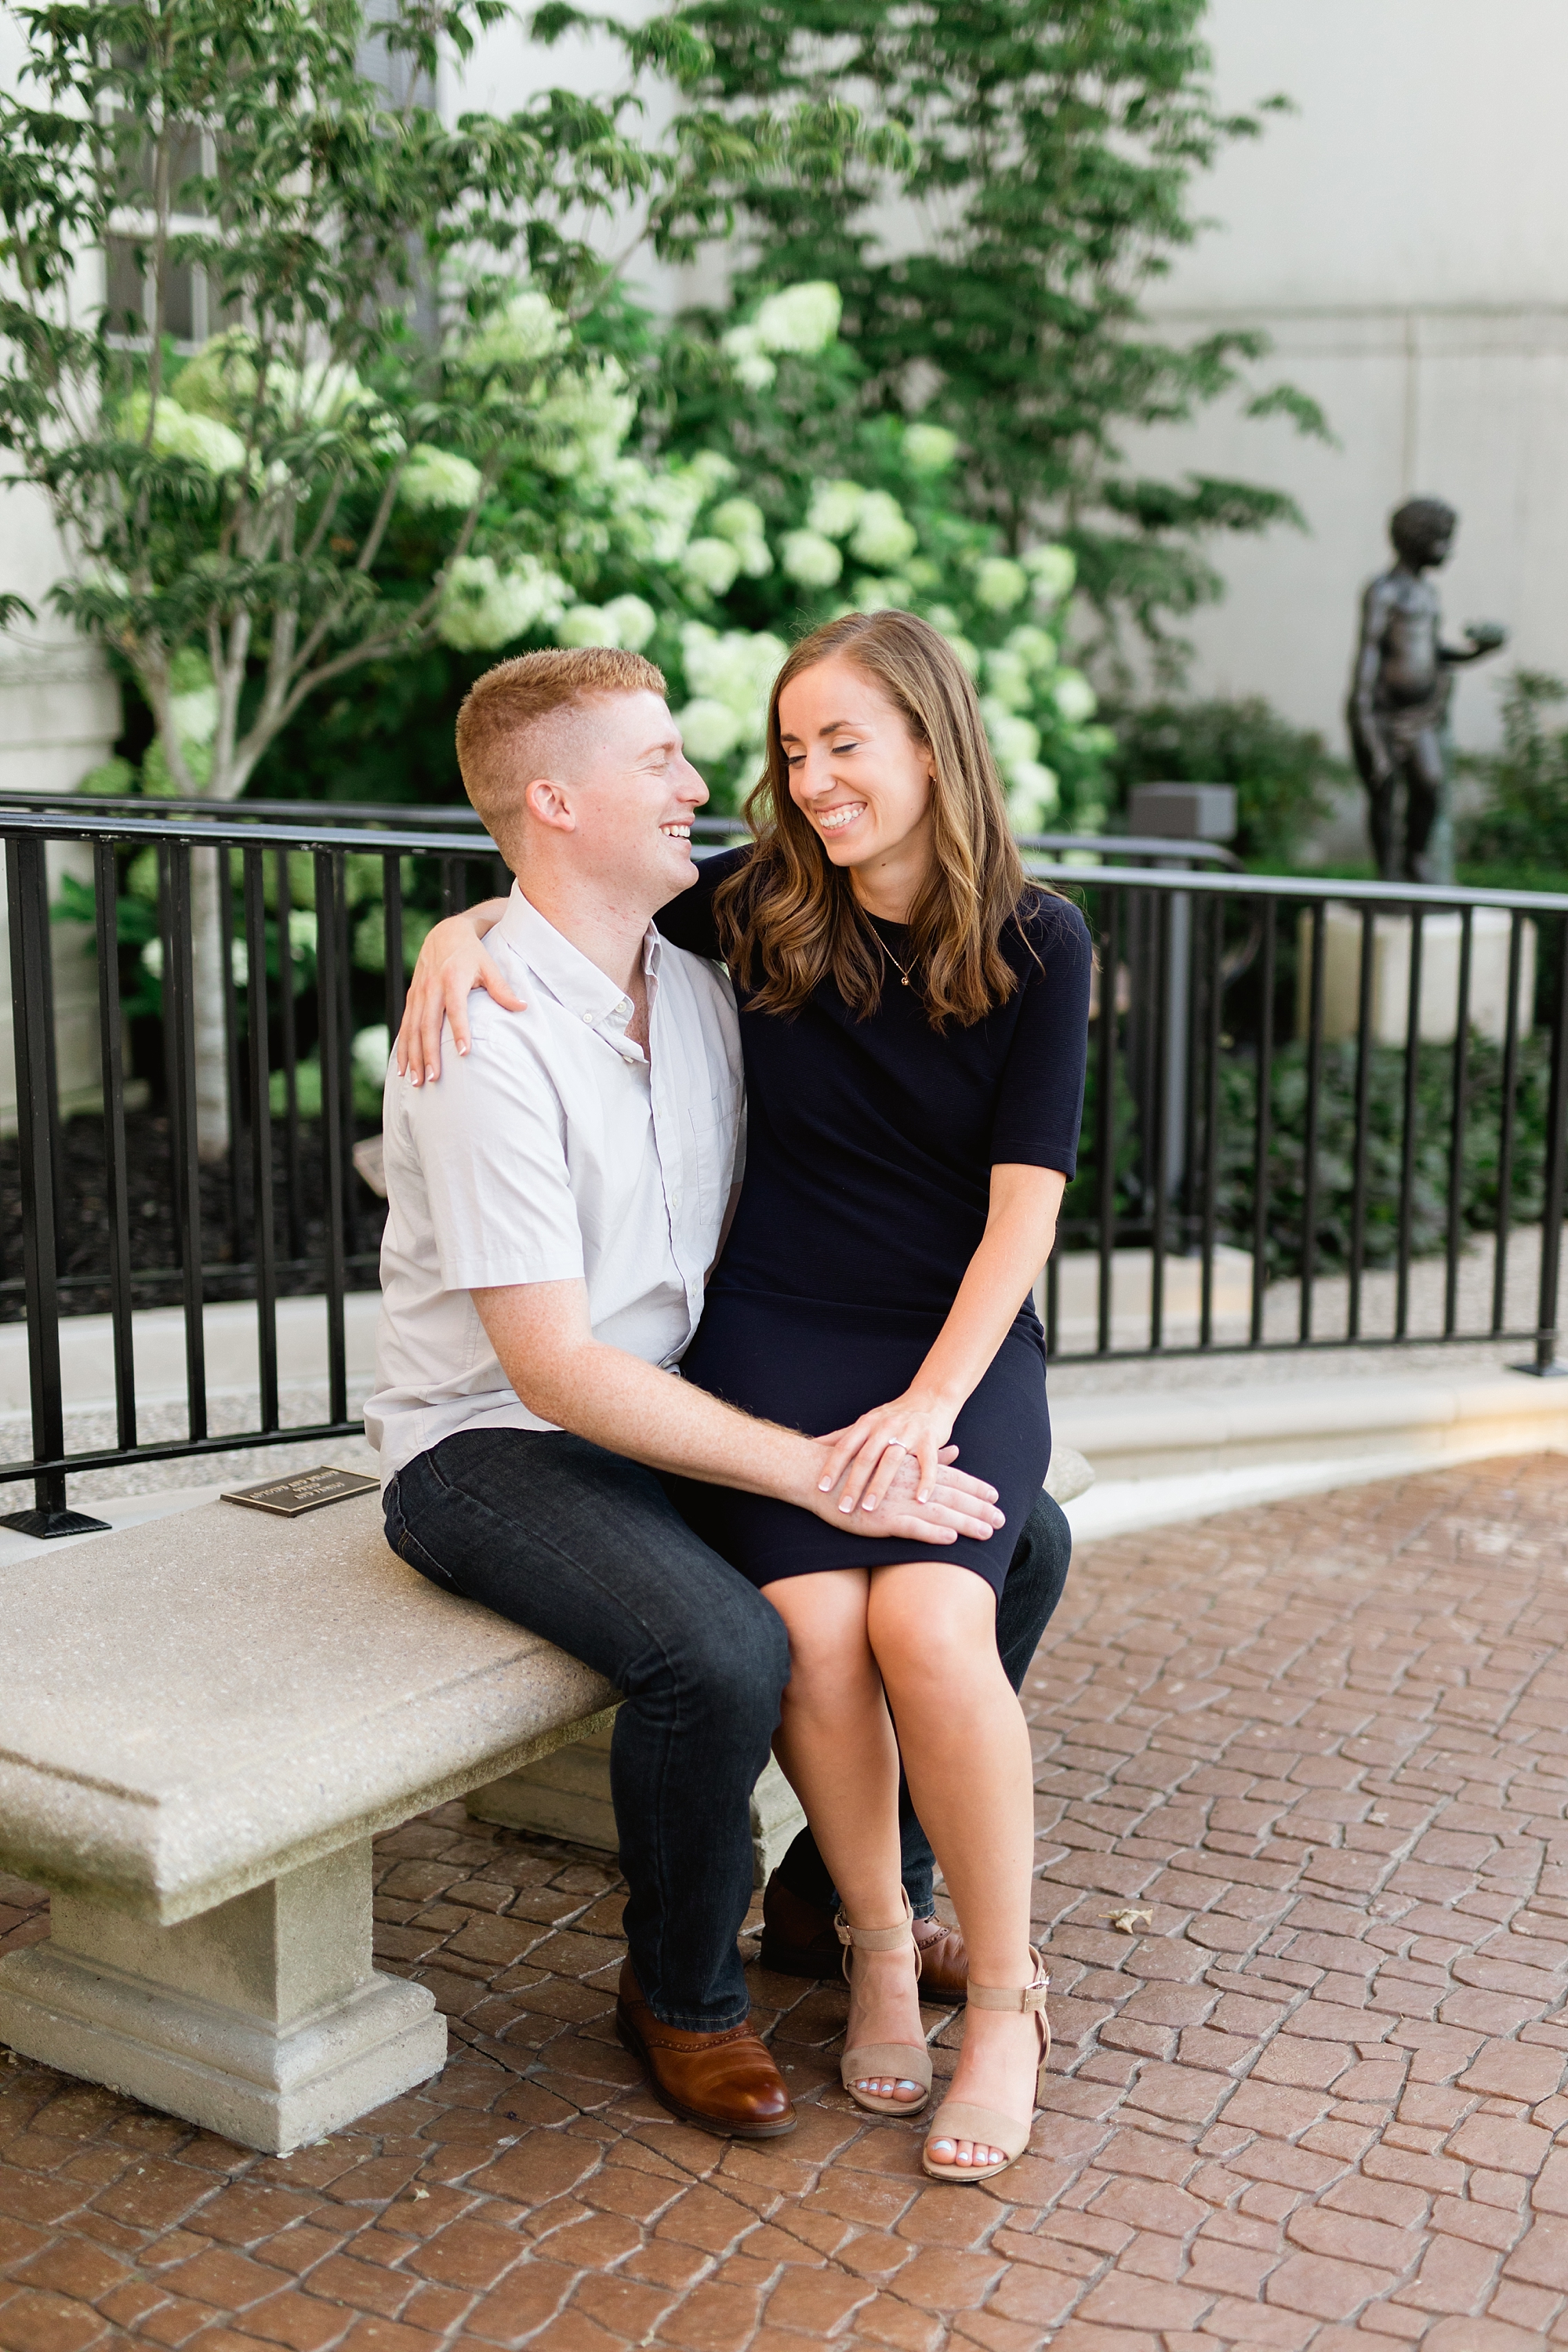 A classic end of summer engagement session at The War Memorial in Grosse Pointe, Michigan by Breanne Rochelle Photography.